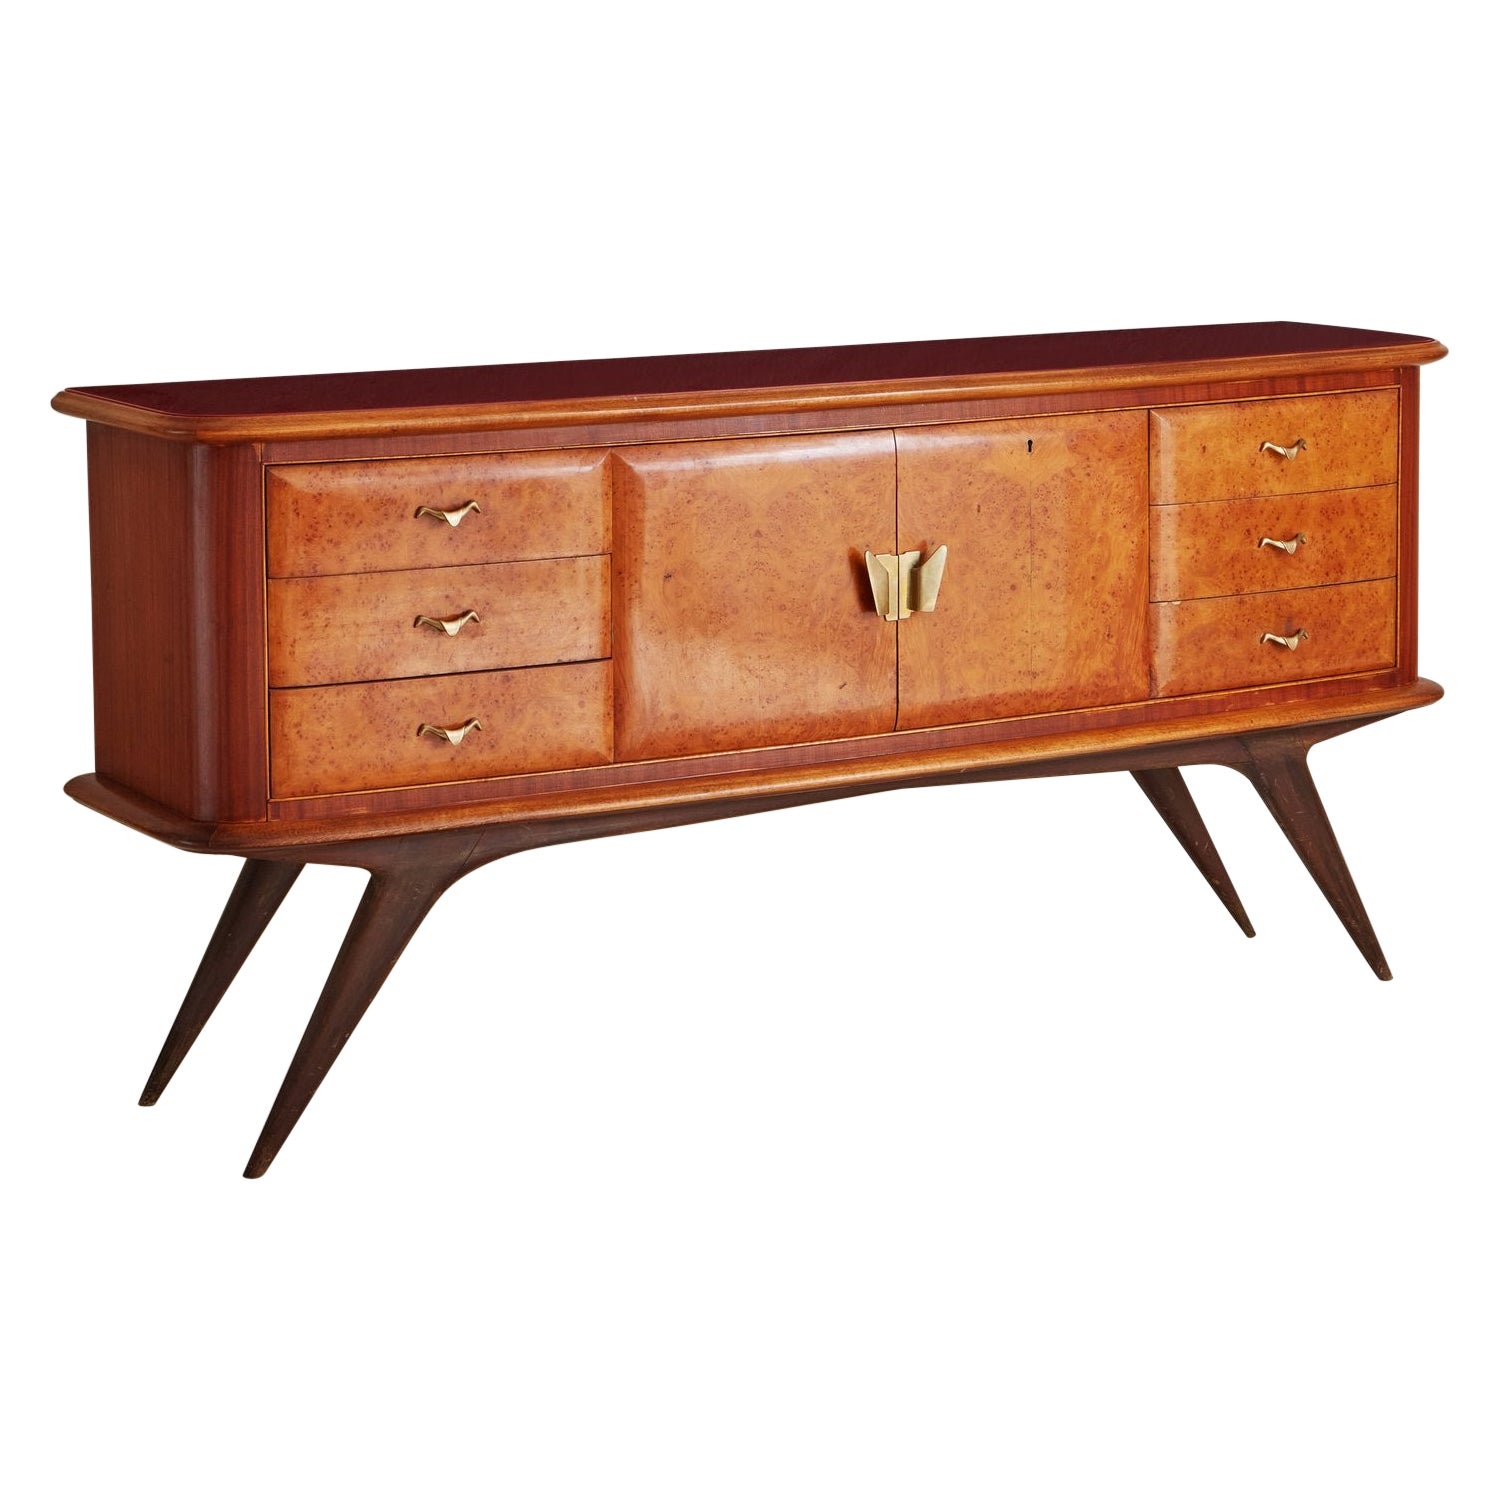 Mahogany + Burlwood Credenza With Red Glass Top, Italy 1960s